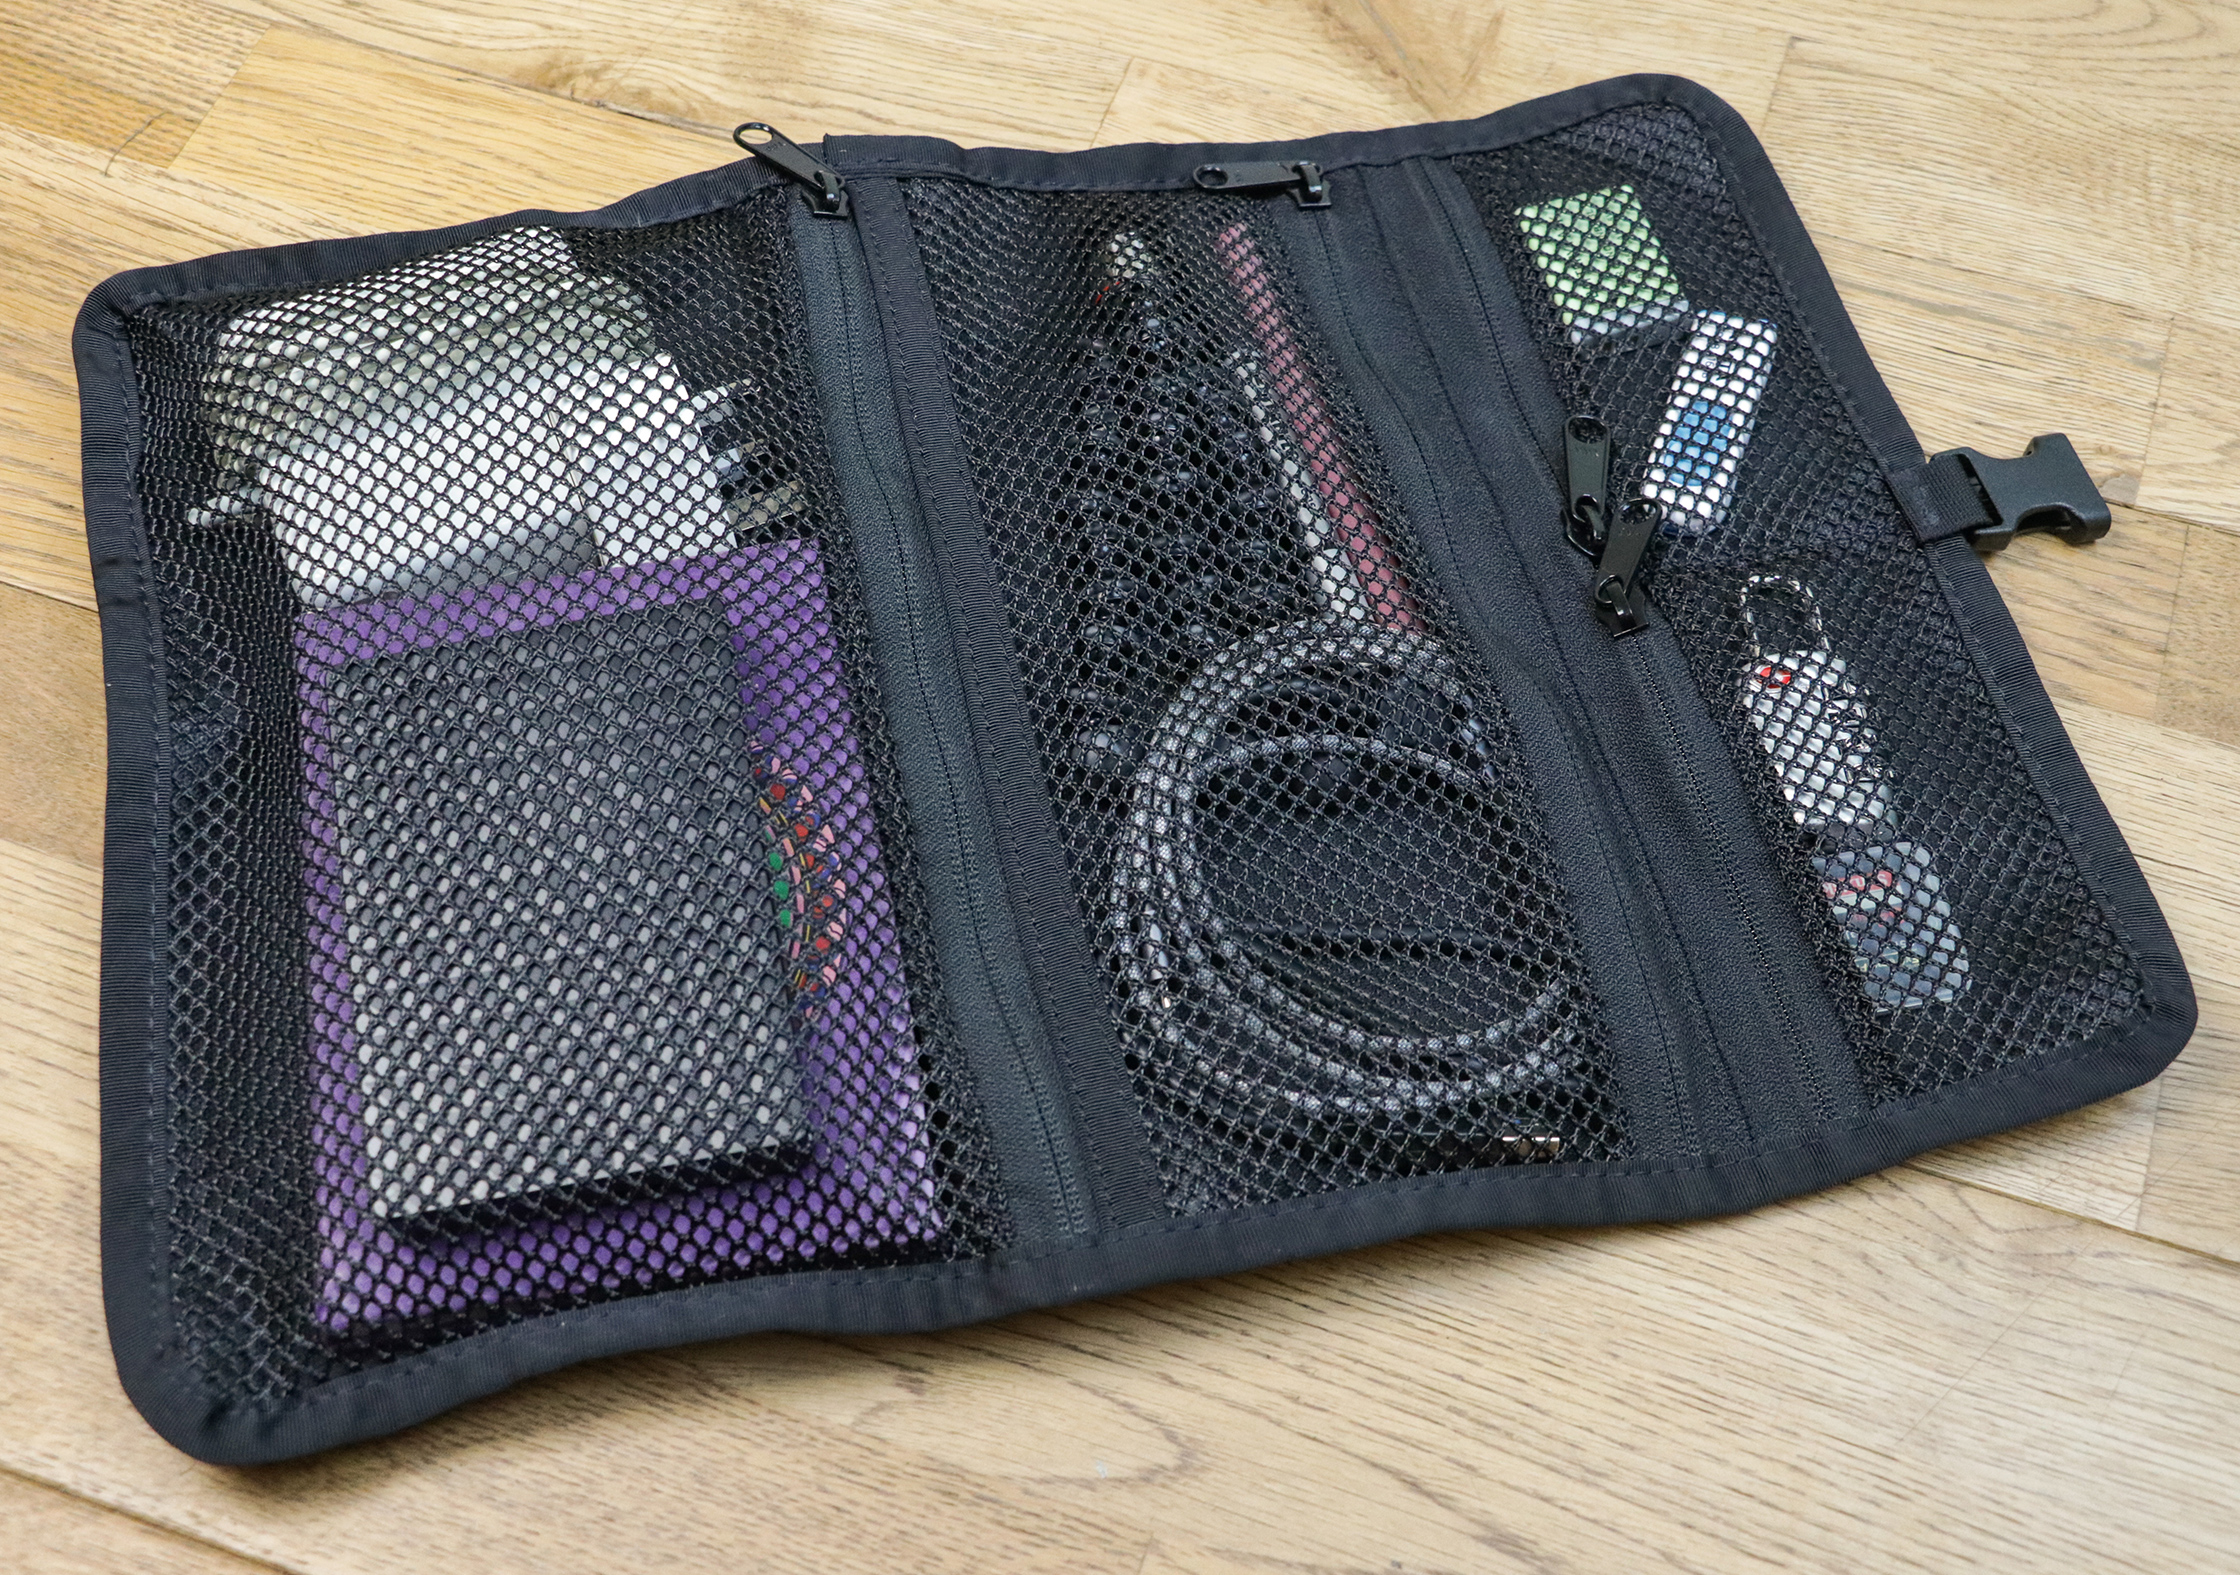 Mission Workshop Internal Tool Roll Full With Items